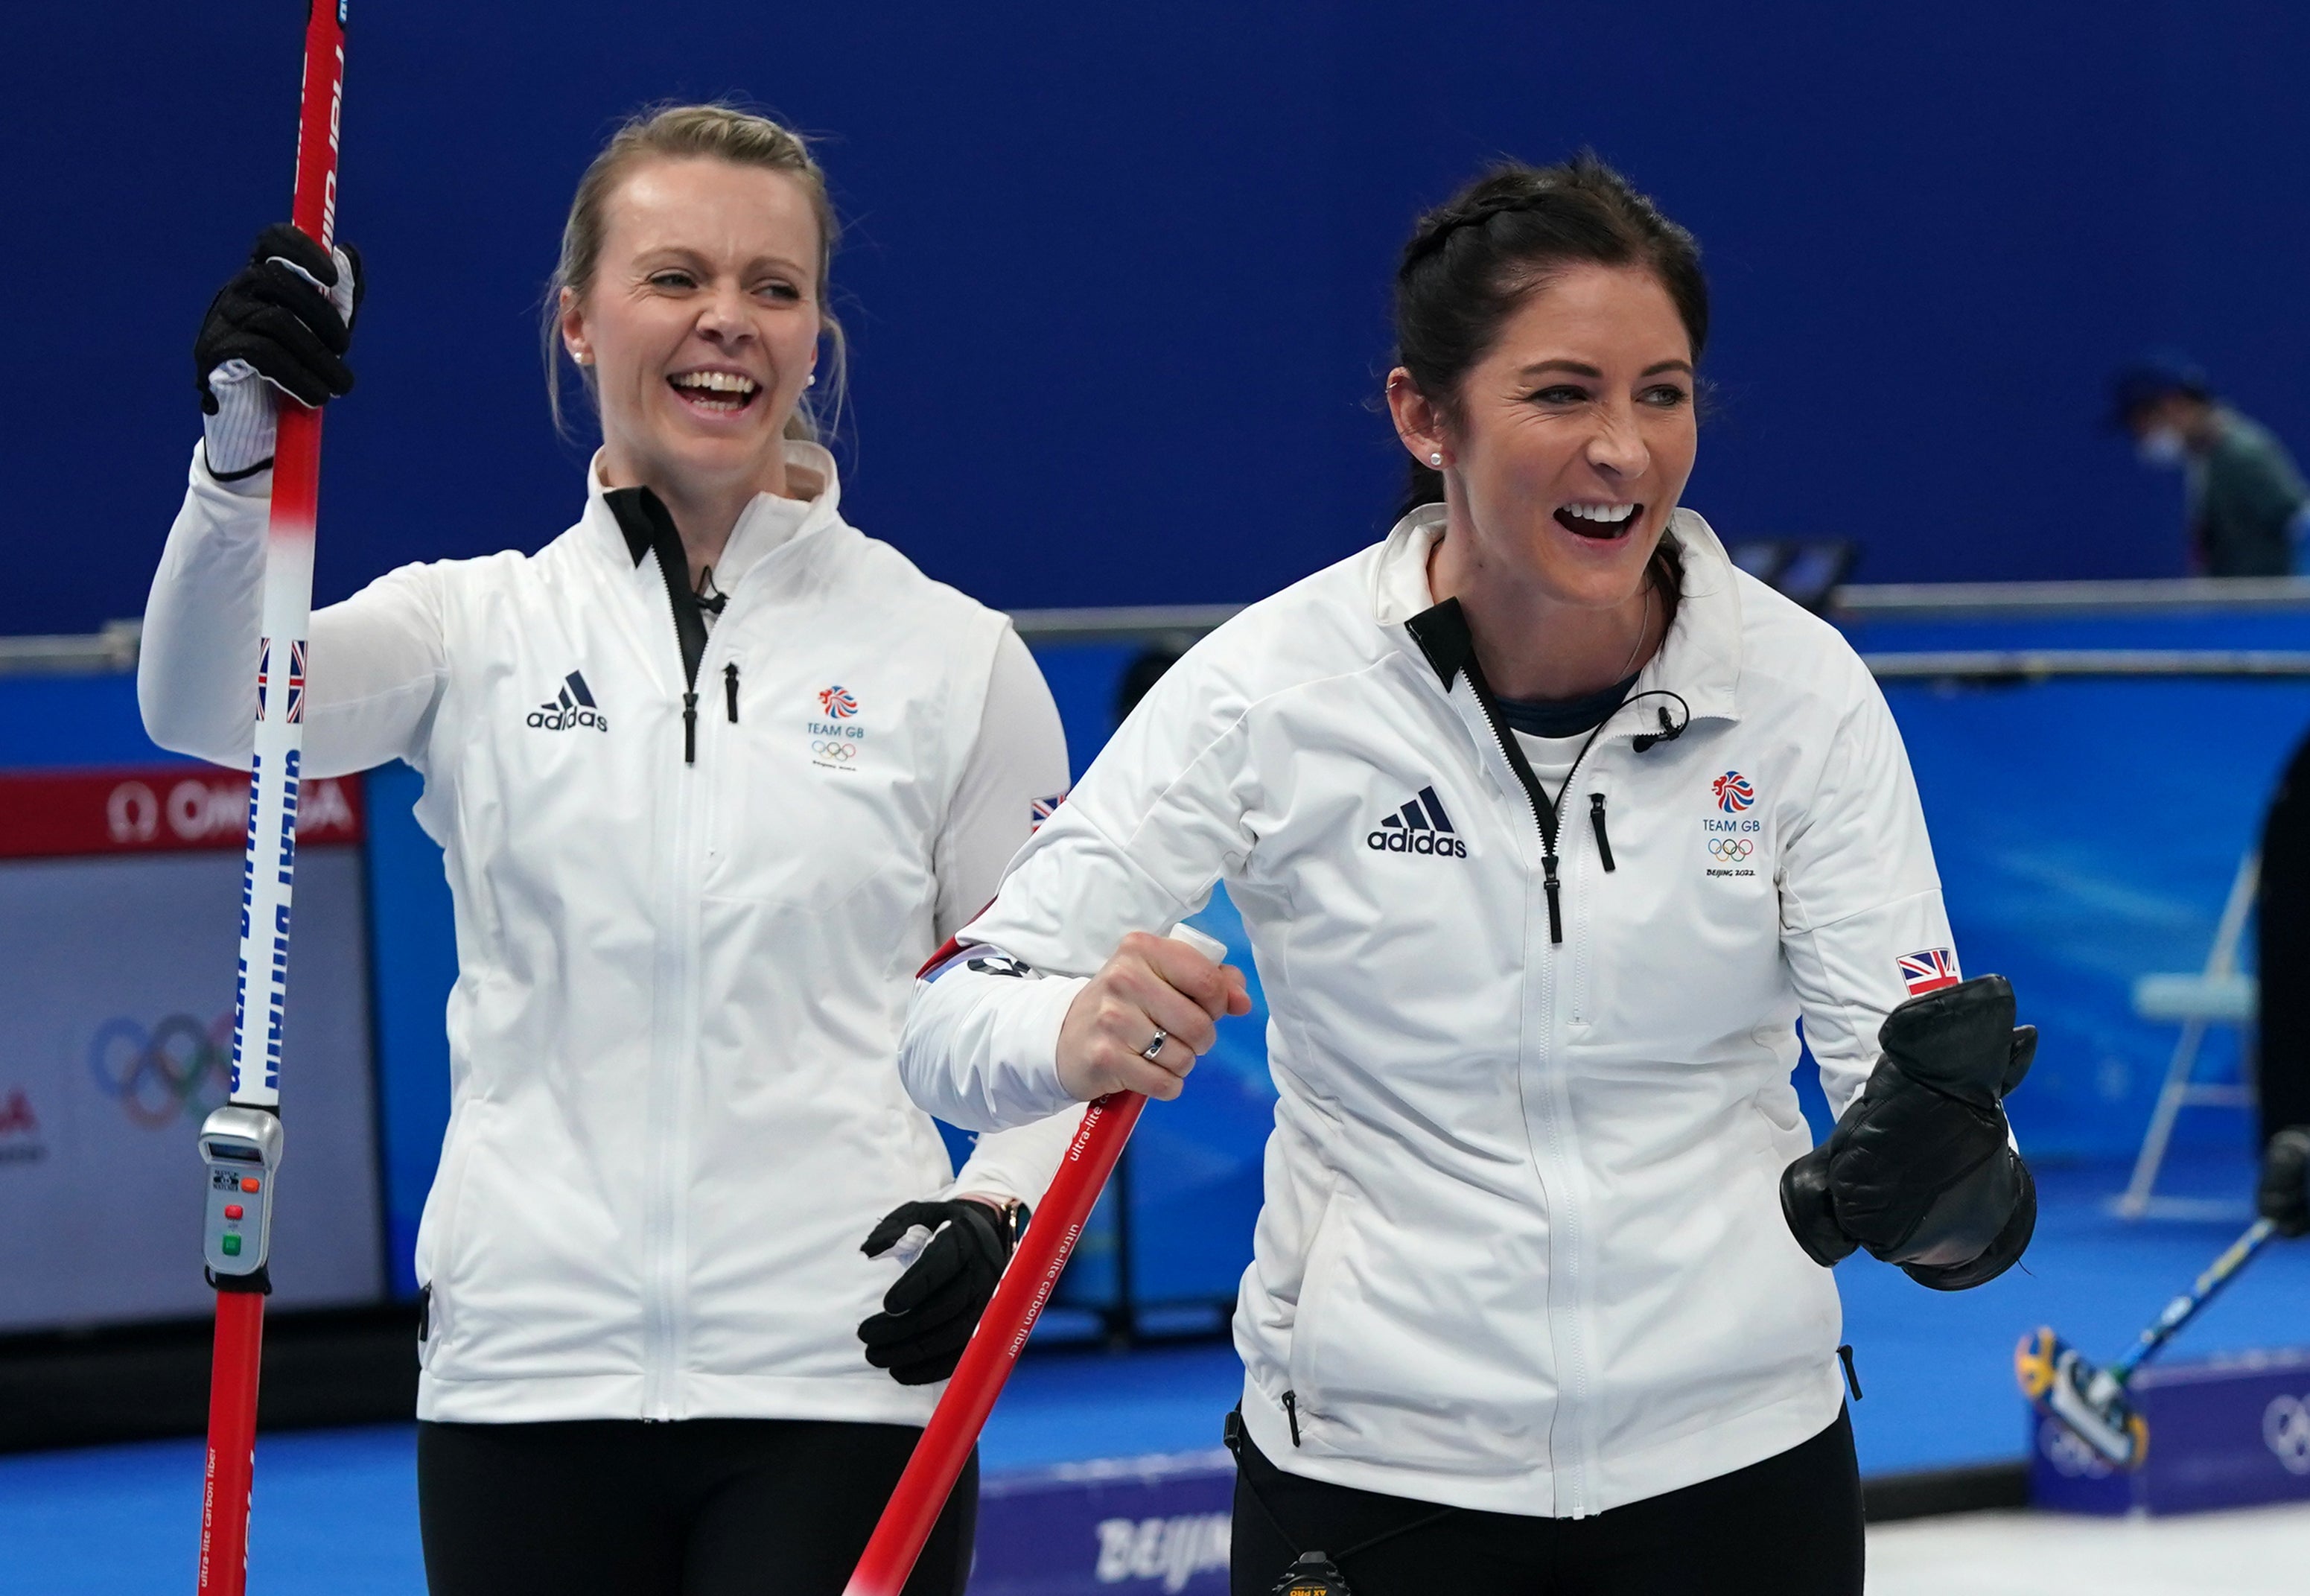 Eve Muirhead's curling team out to give GB golden finish to Winter Olympics